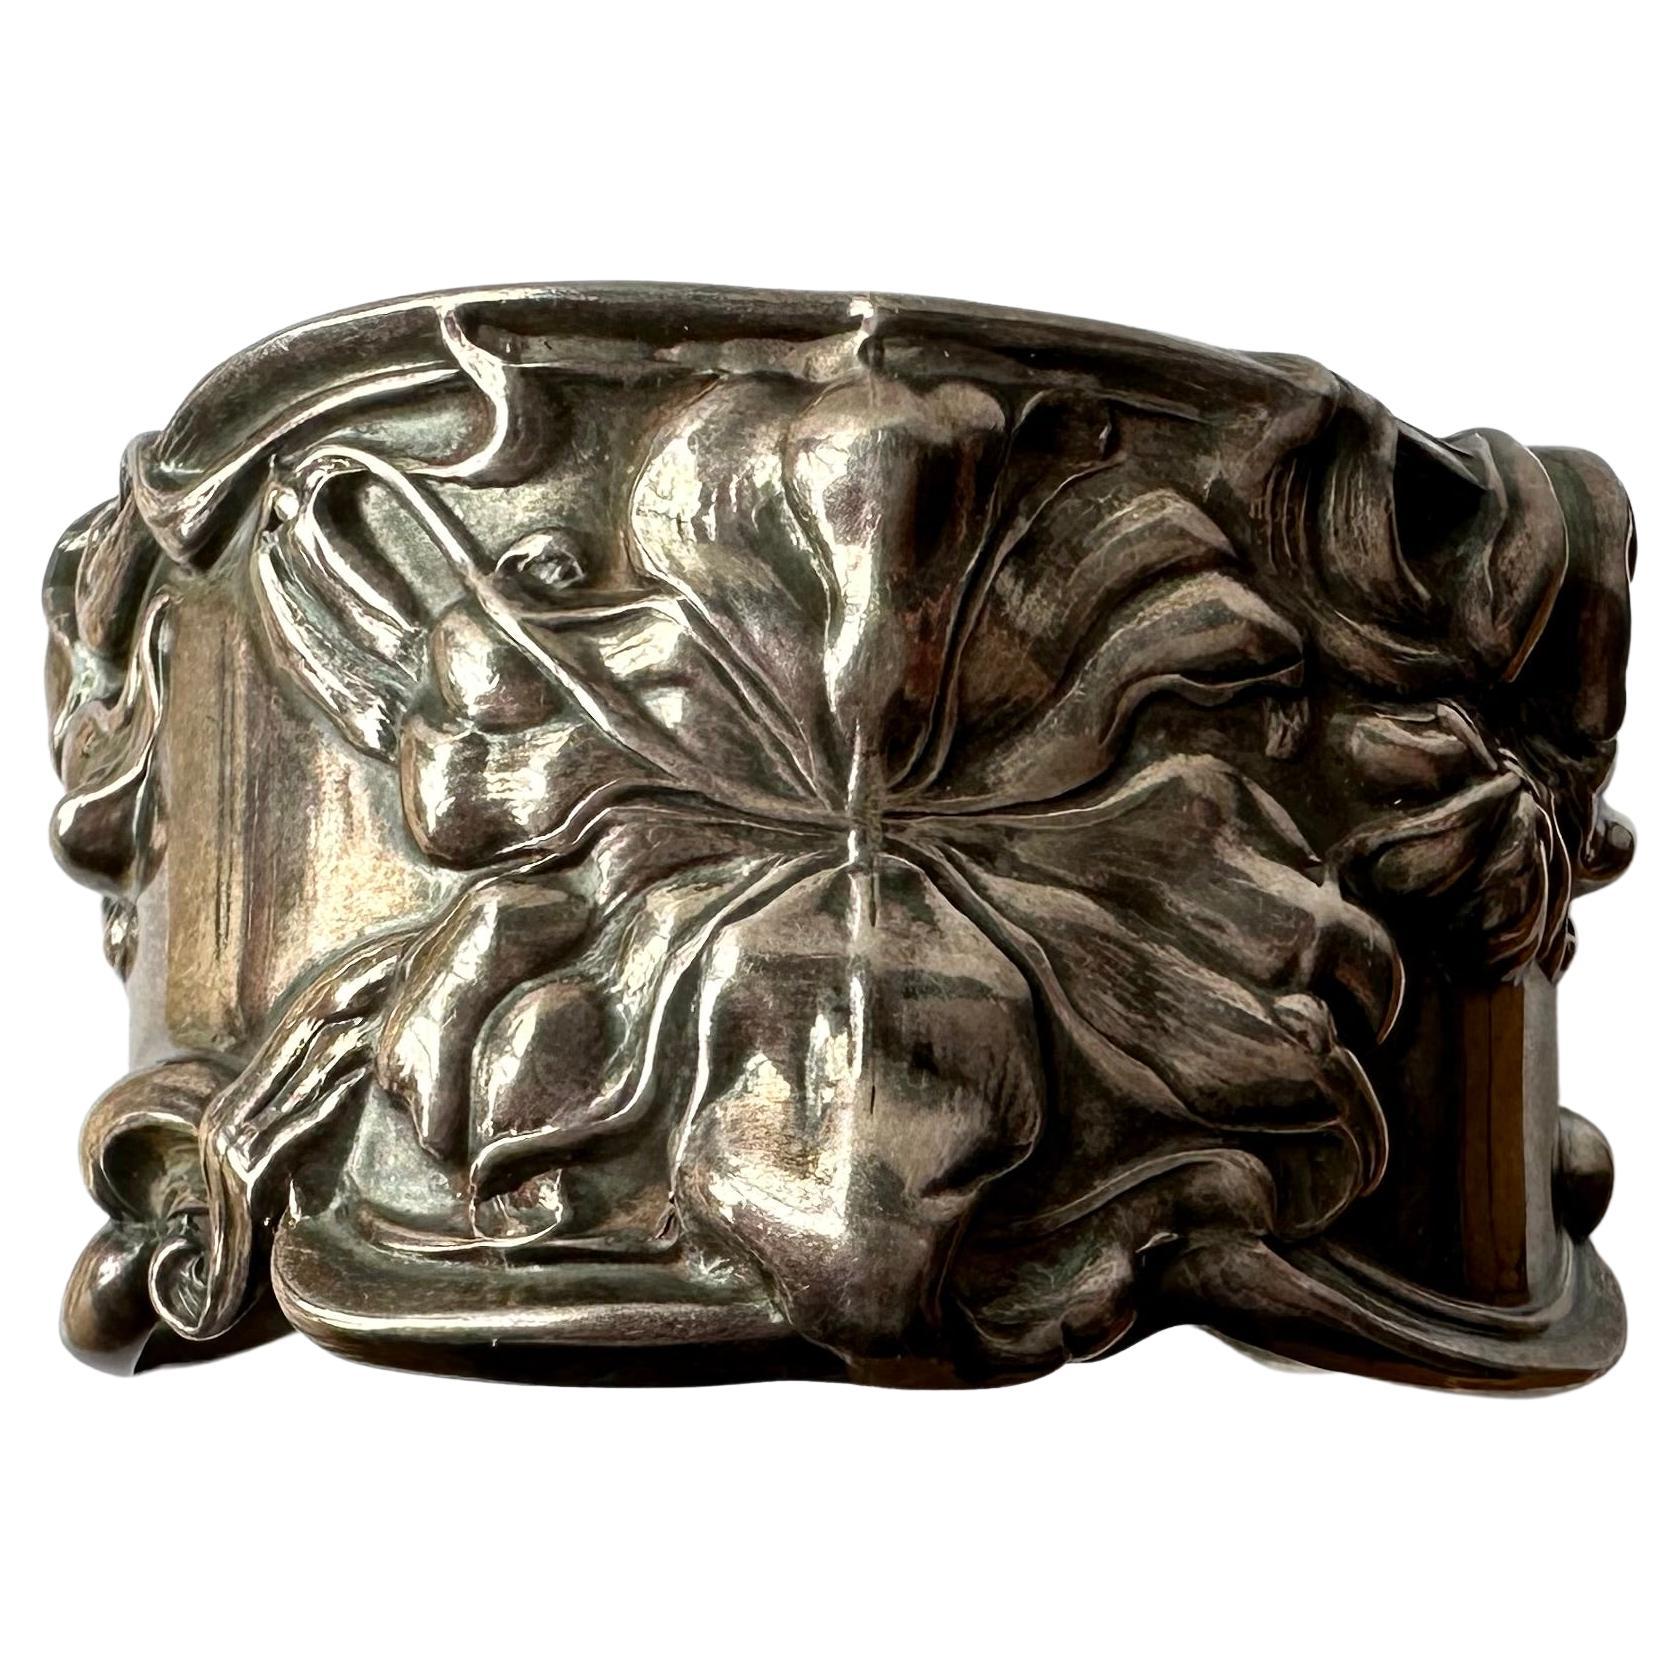 A Frank Whiting Iris Themed Silver Cuff Bracelet For Sale